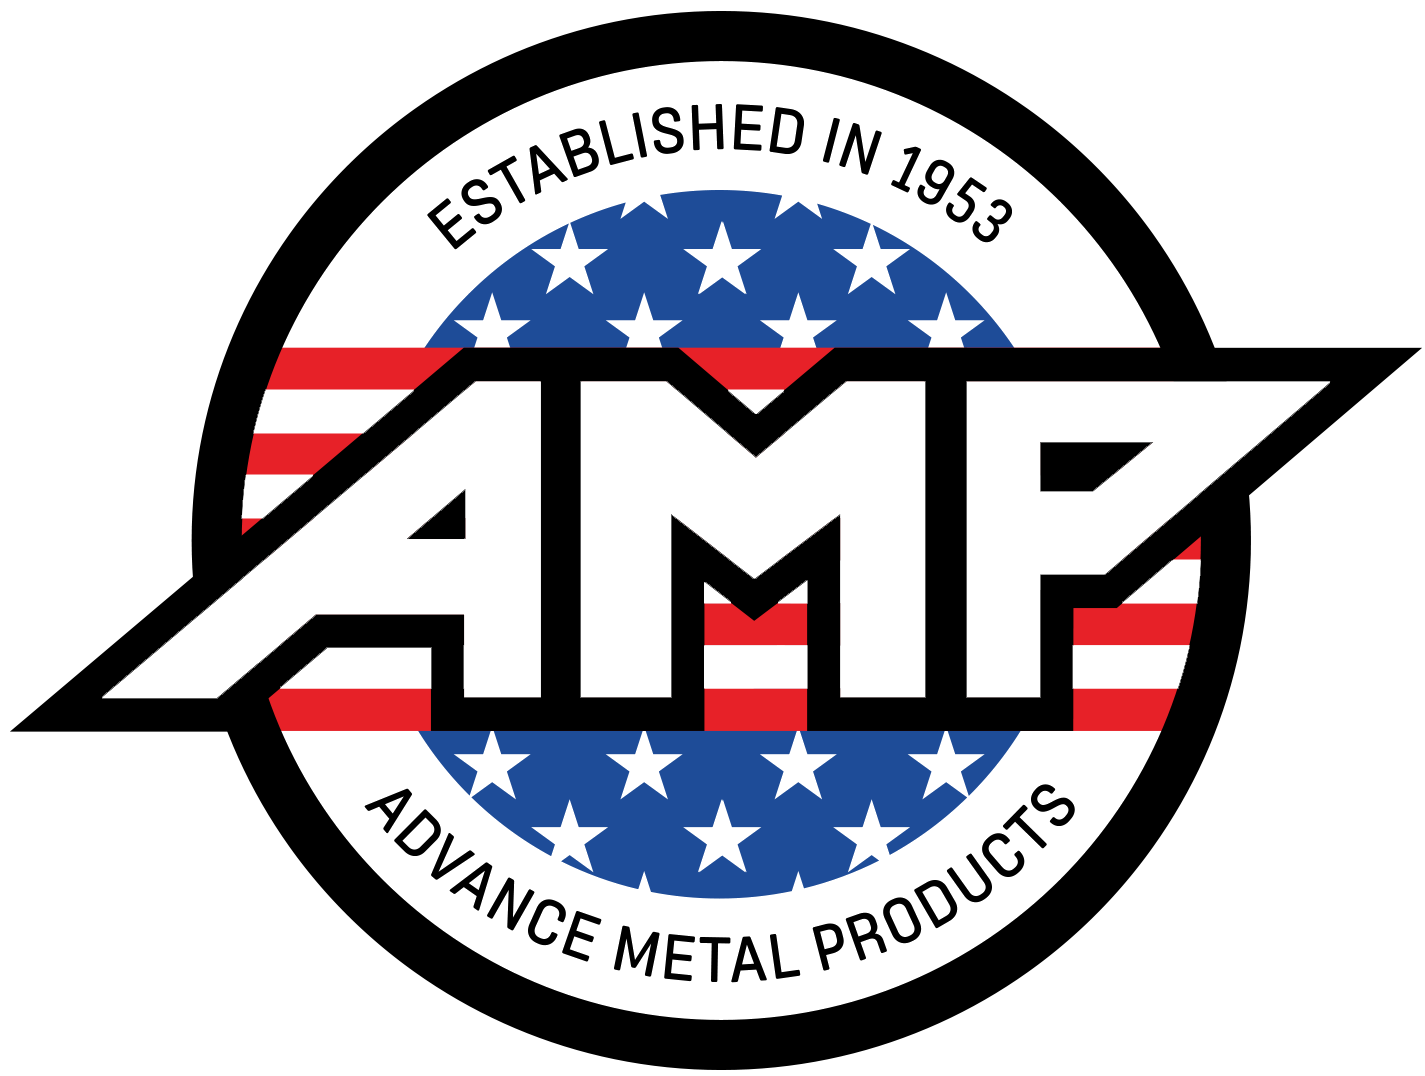 Advance Metal Products